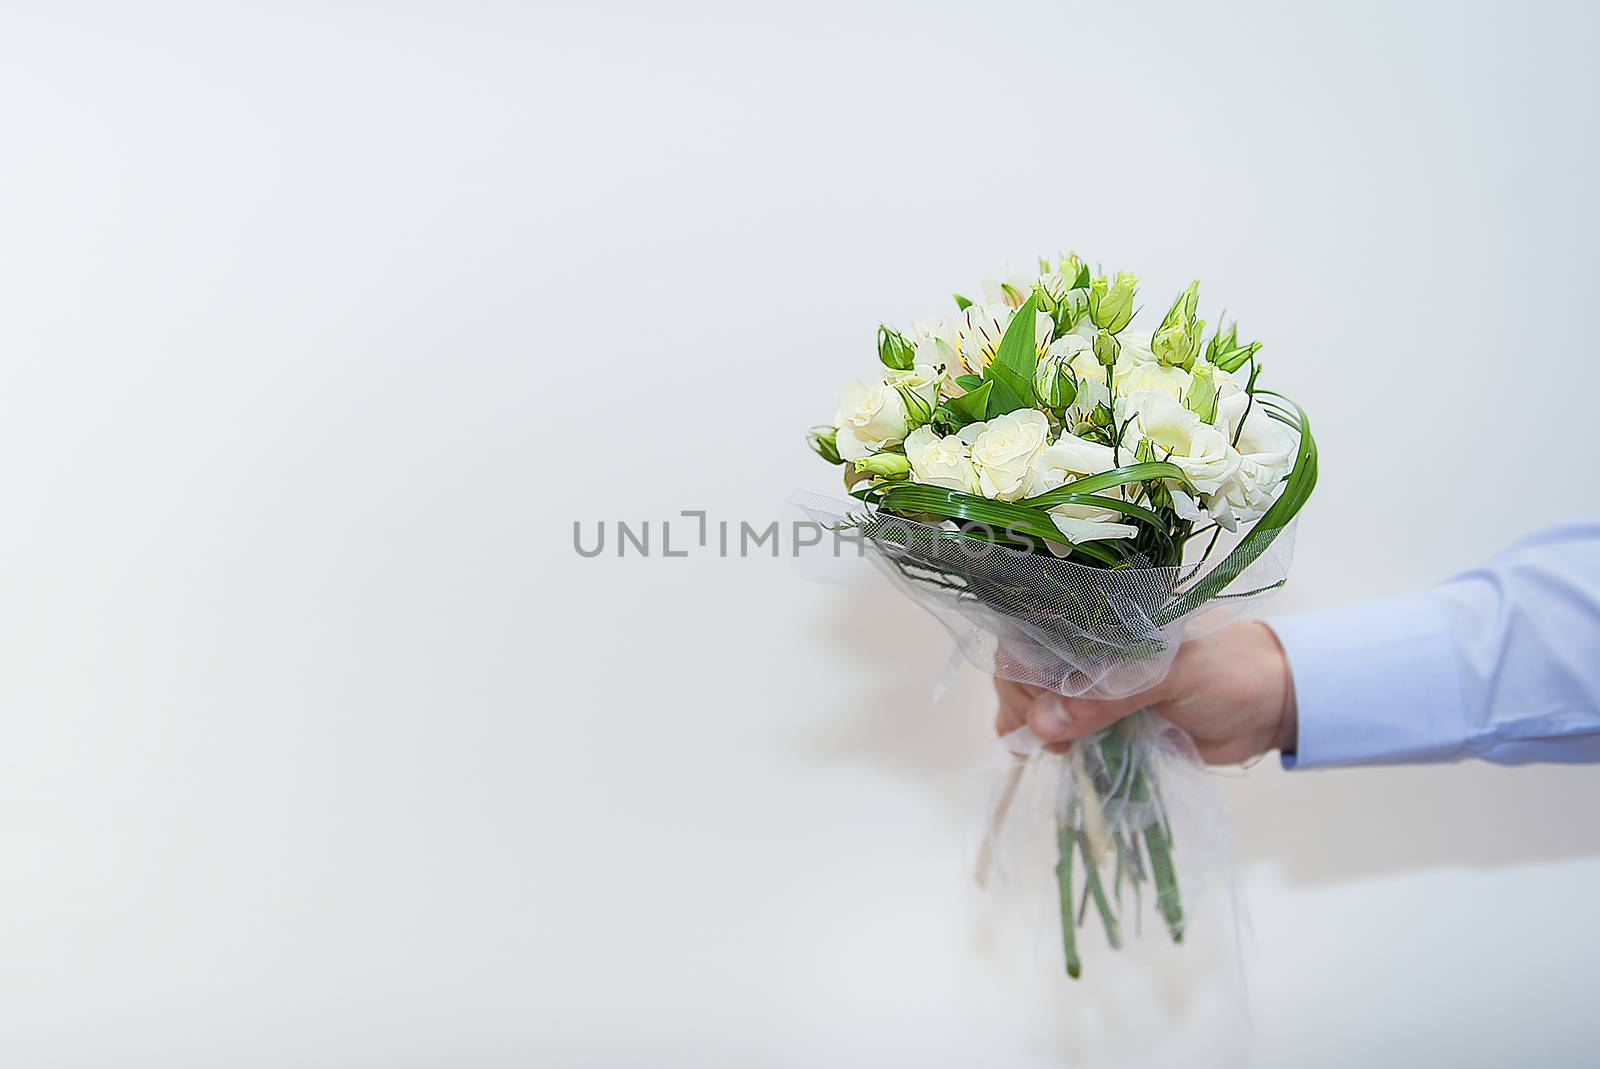 wedding bouquet in a hand of the groom on white background.